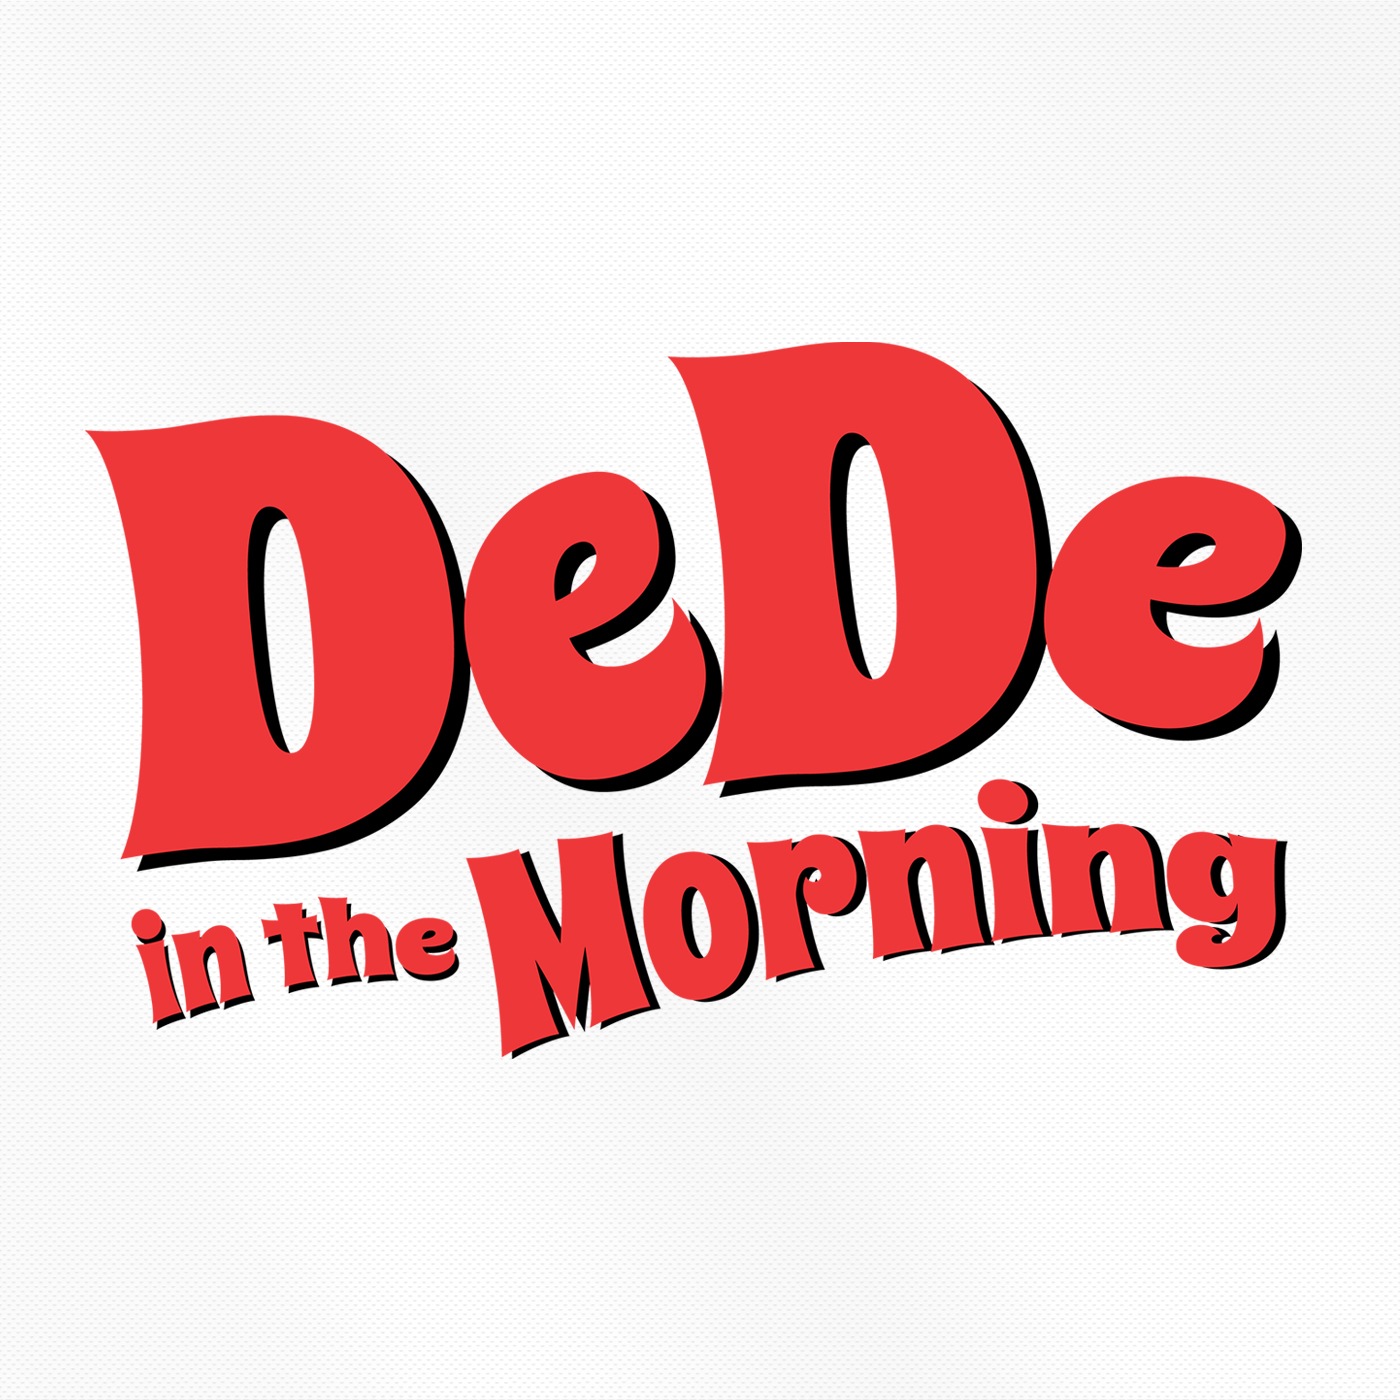 dede in the morning